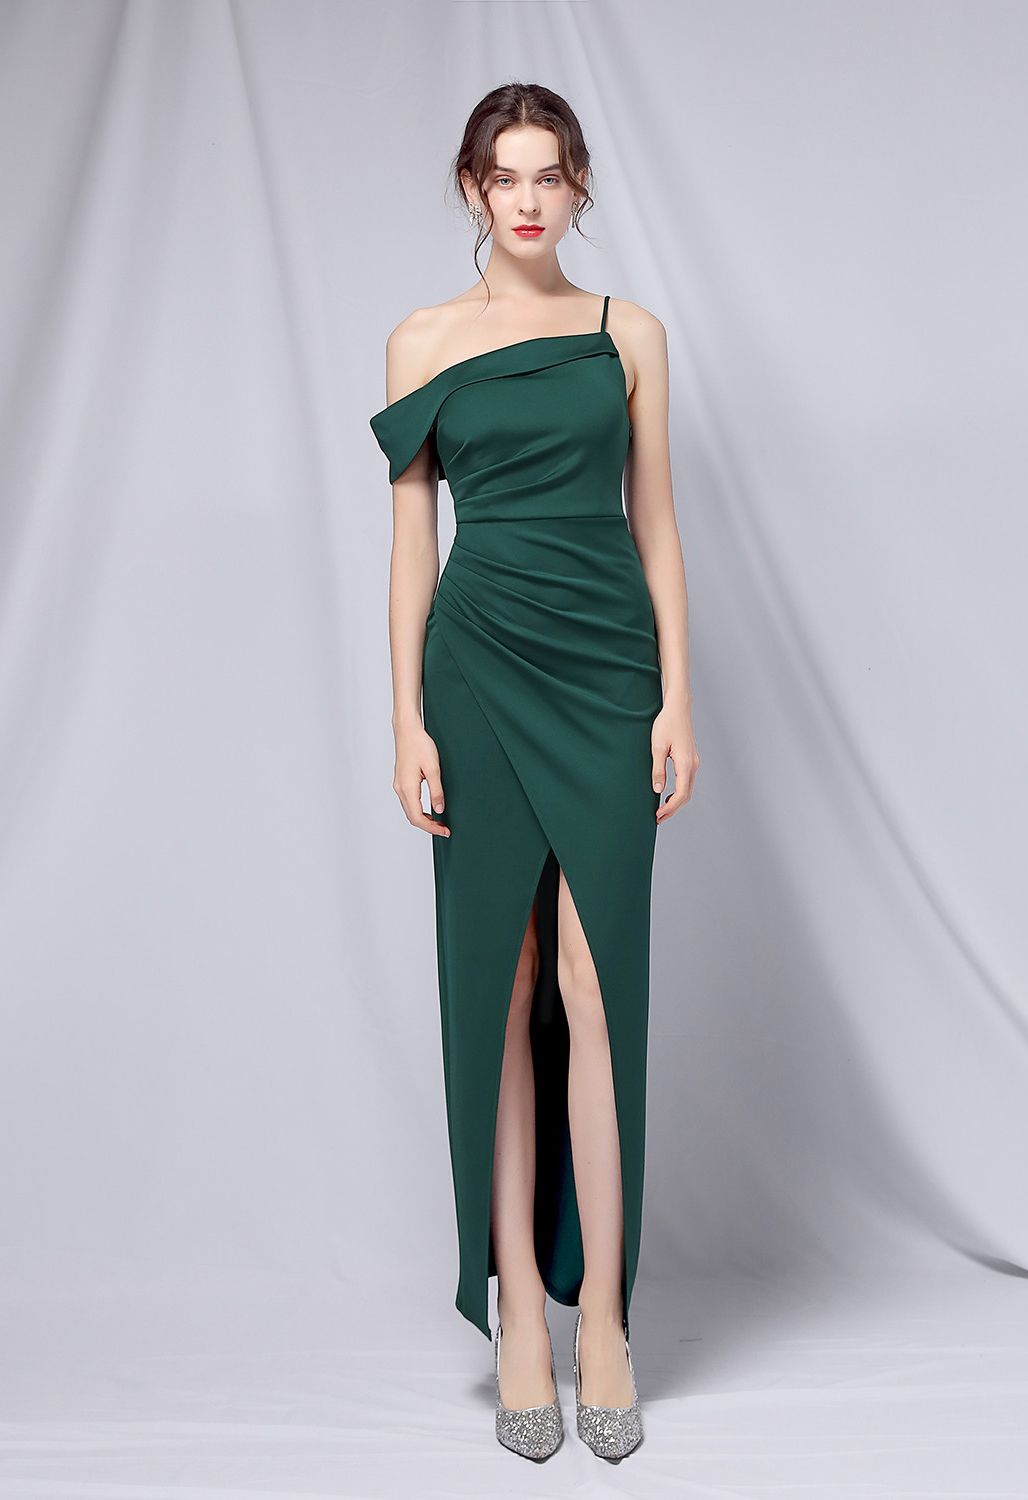 Single Strap Front Slit Gown in Emerald